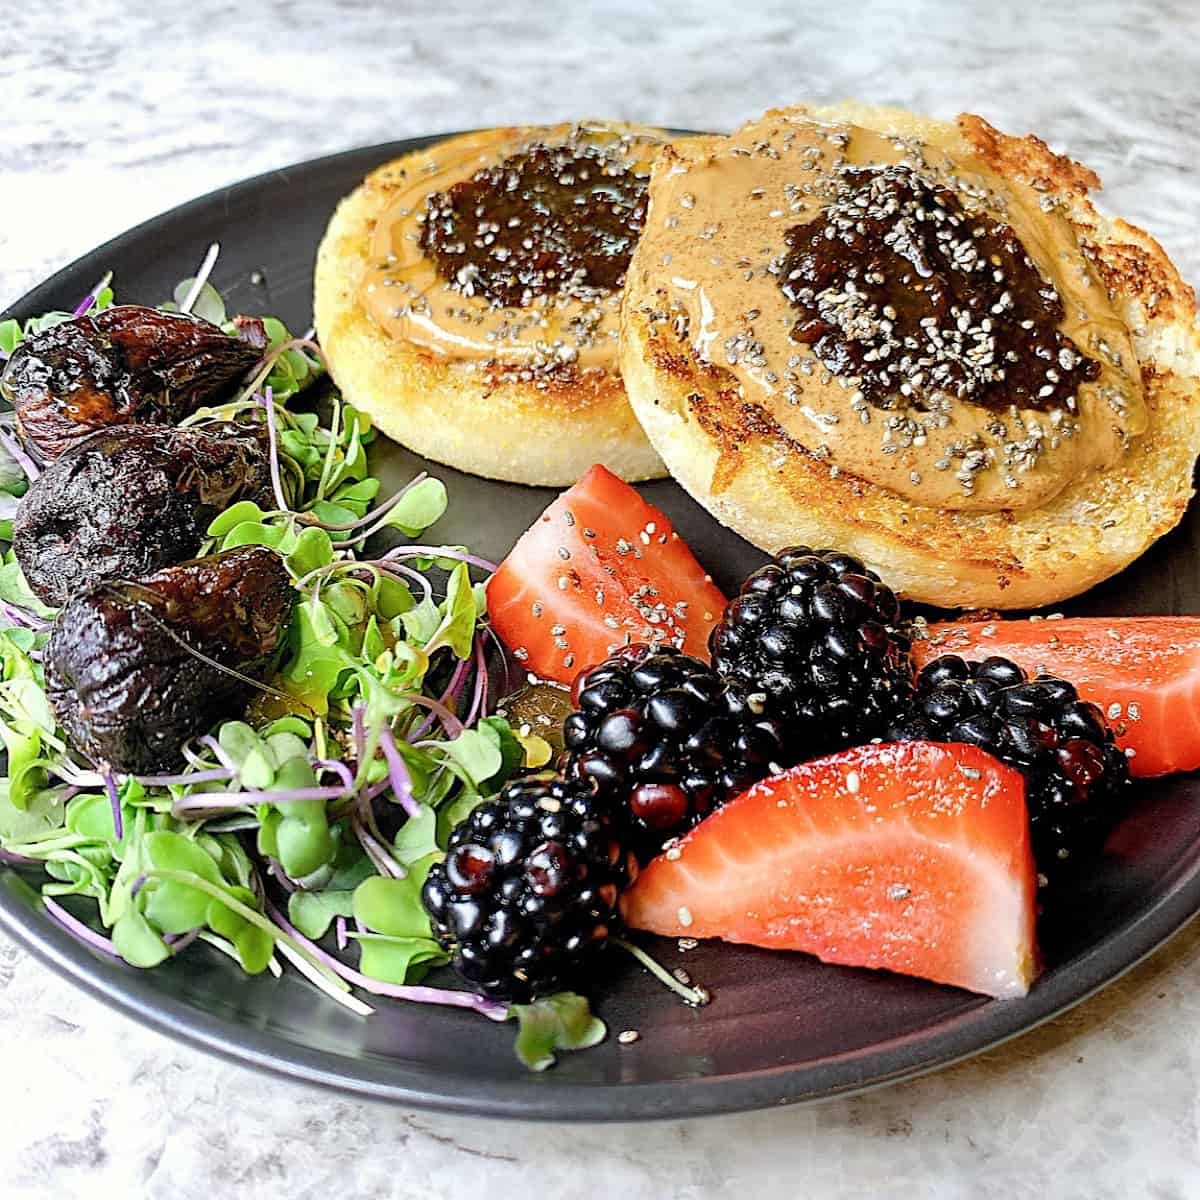 Toasted english muffin topped with almond butter and fig jelly plated with microgreens and berries on a black plate